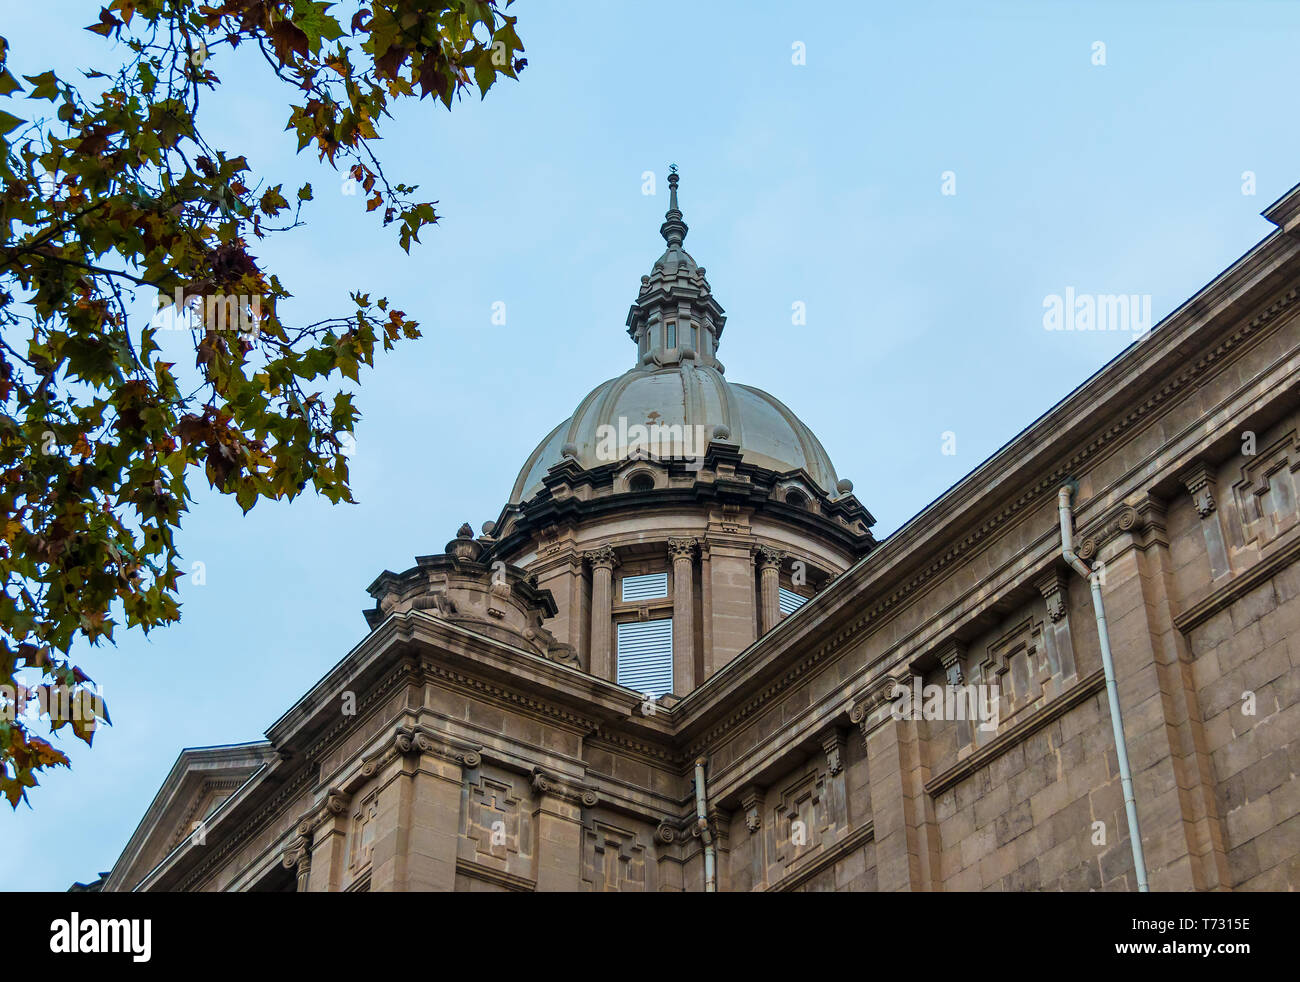 Barcelona, Catalonia, Spain - November 16, 2018: Worm's-eye view of the tholobate and the dome of the National Art Museum of Catalonia on the backgrou Stock Photo